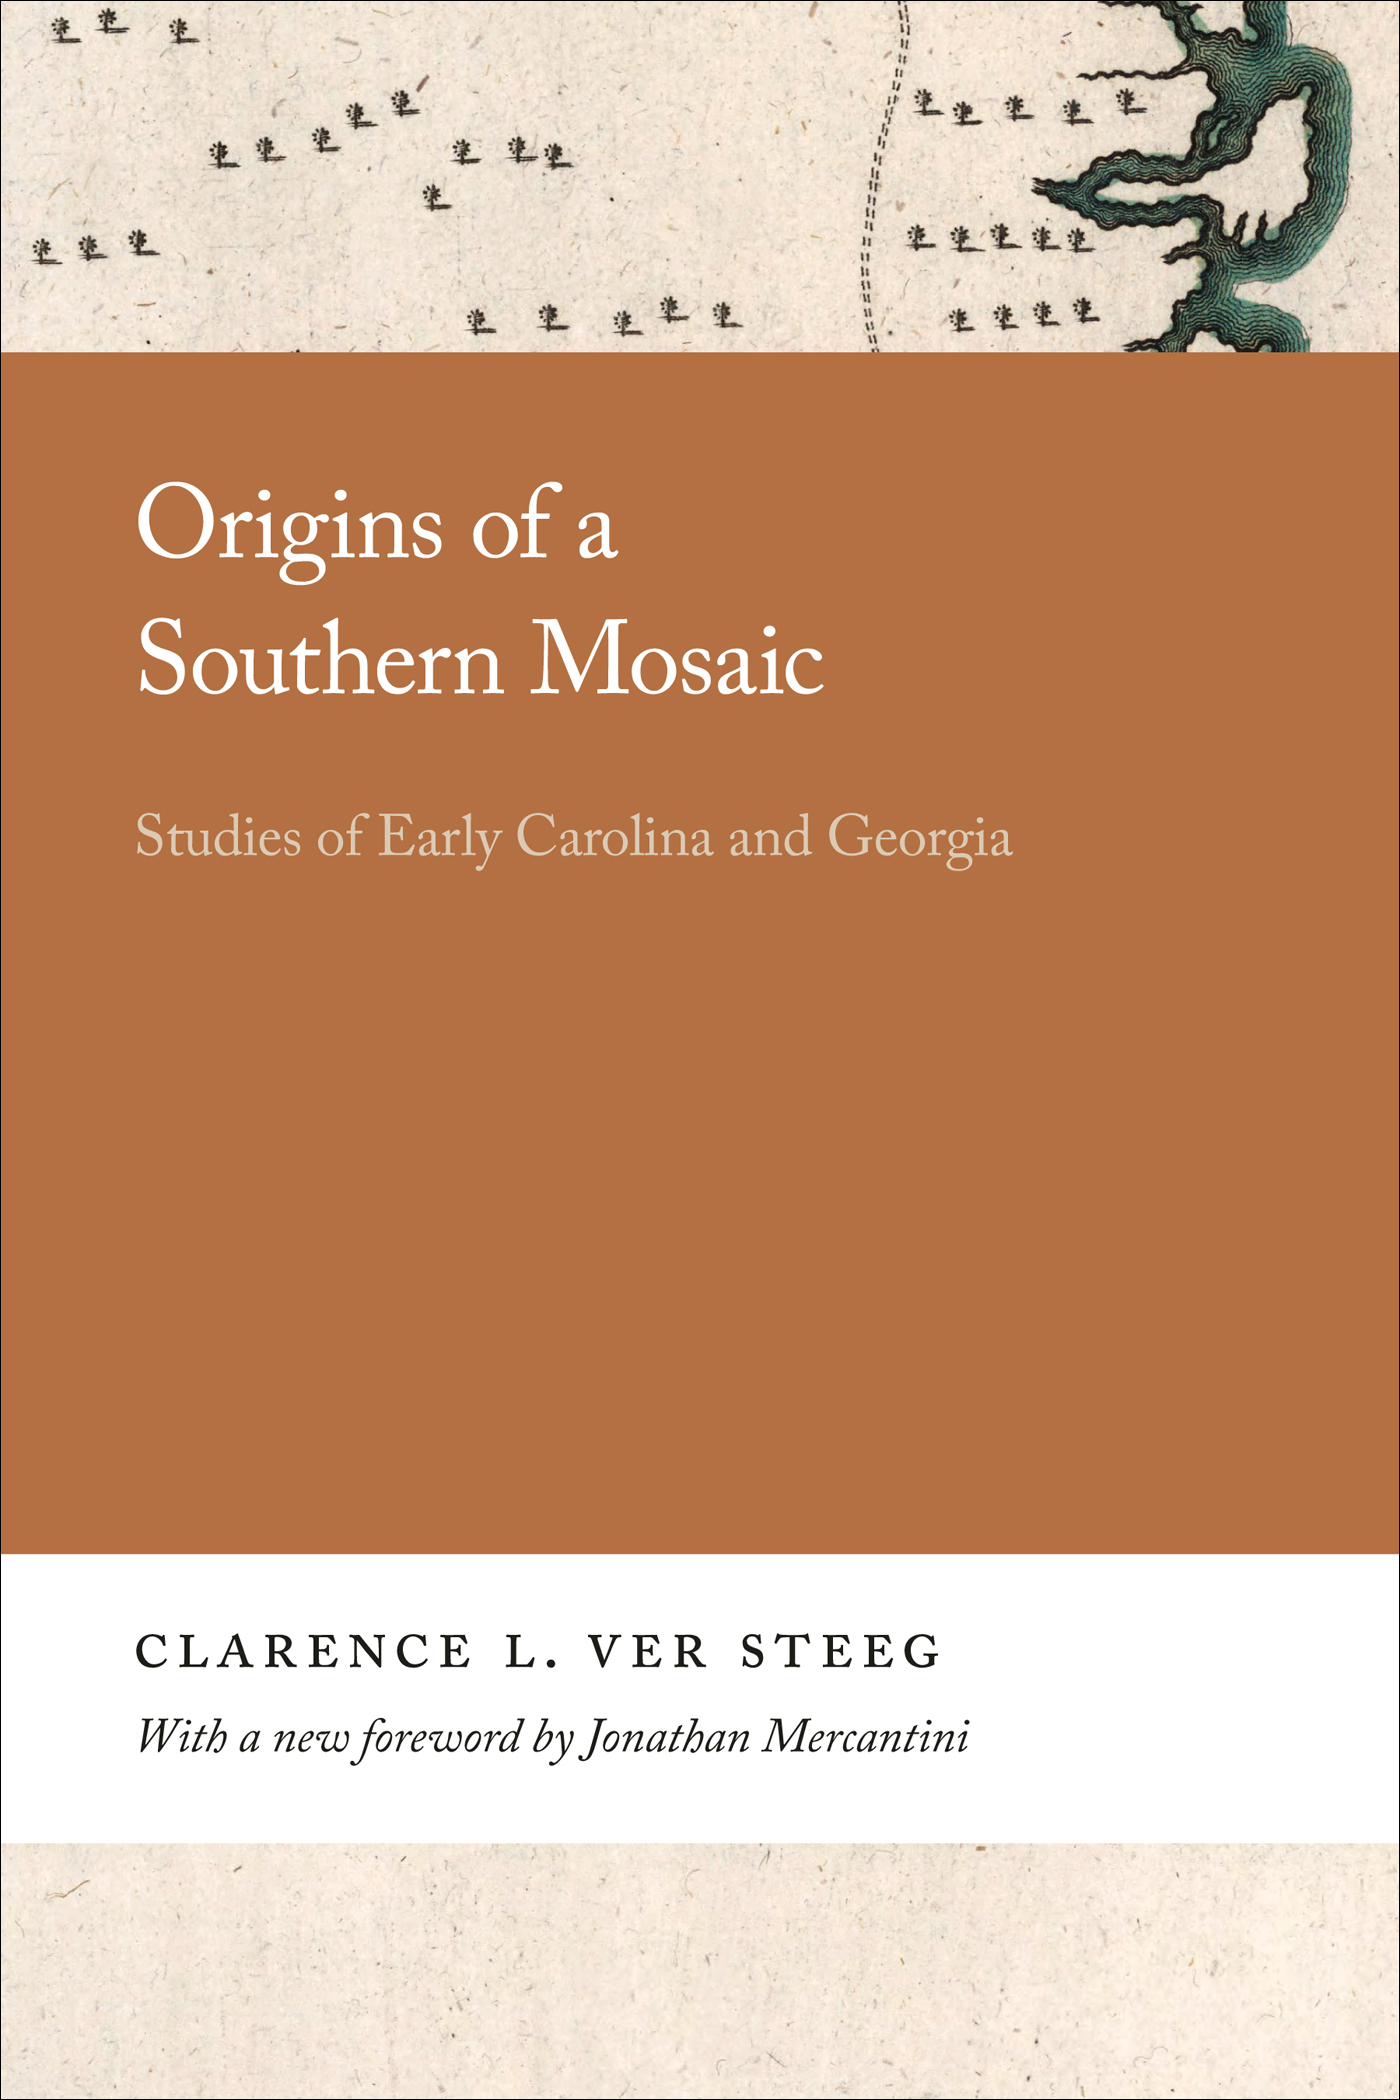 Cover page of the book “Origins of a Southern Mosaic.”